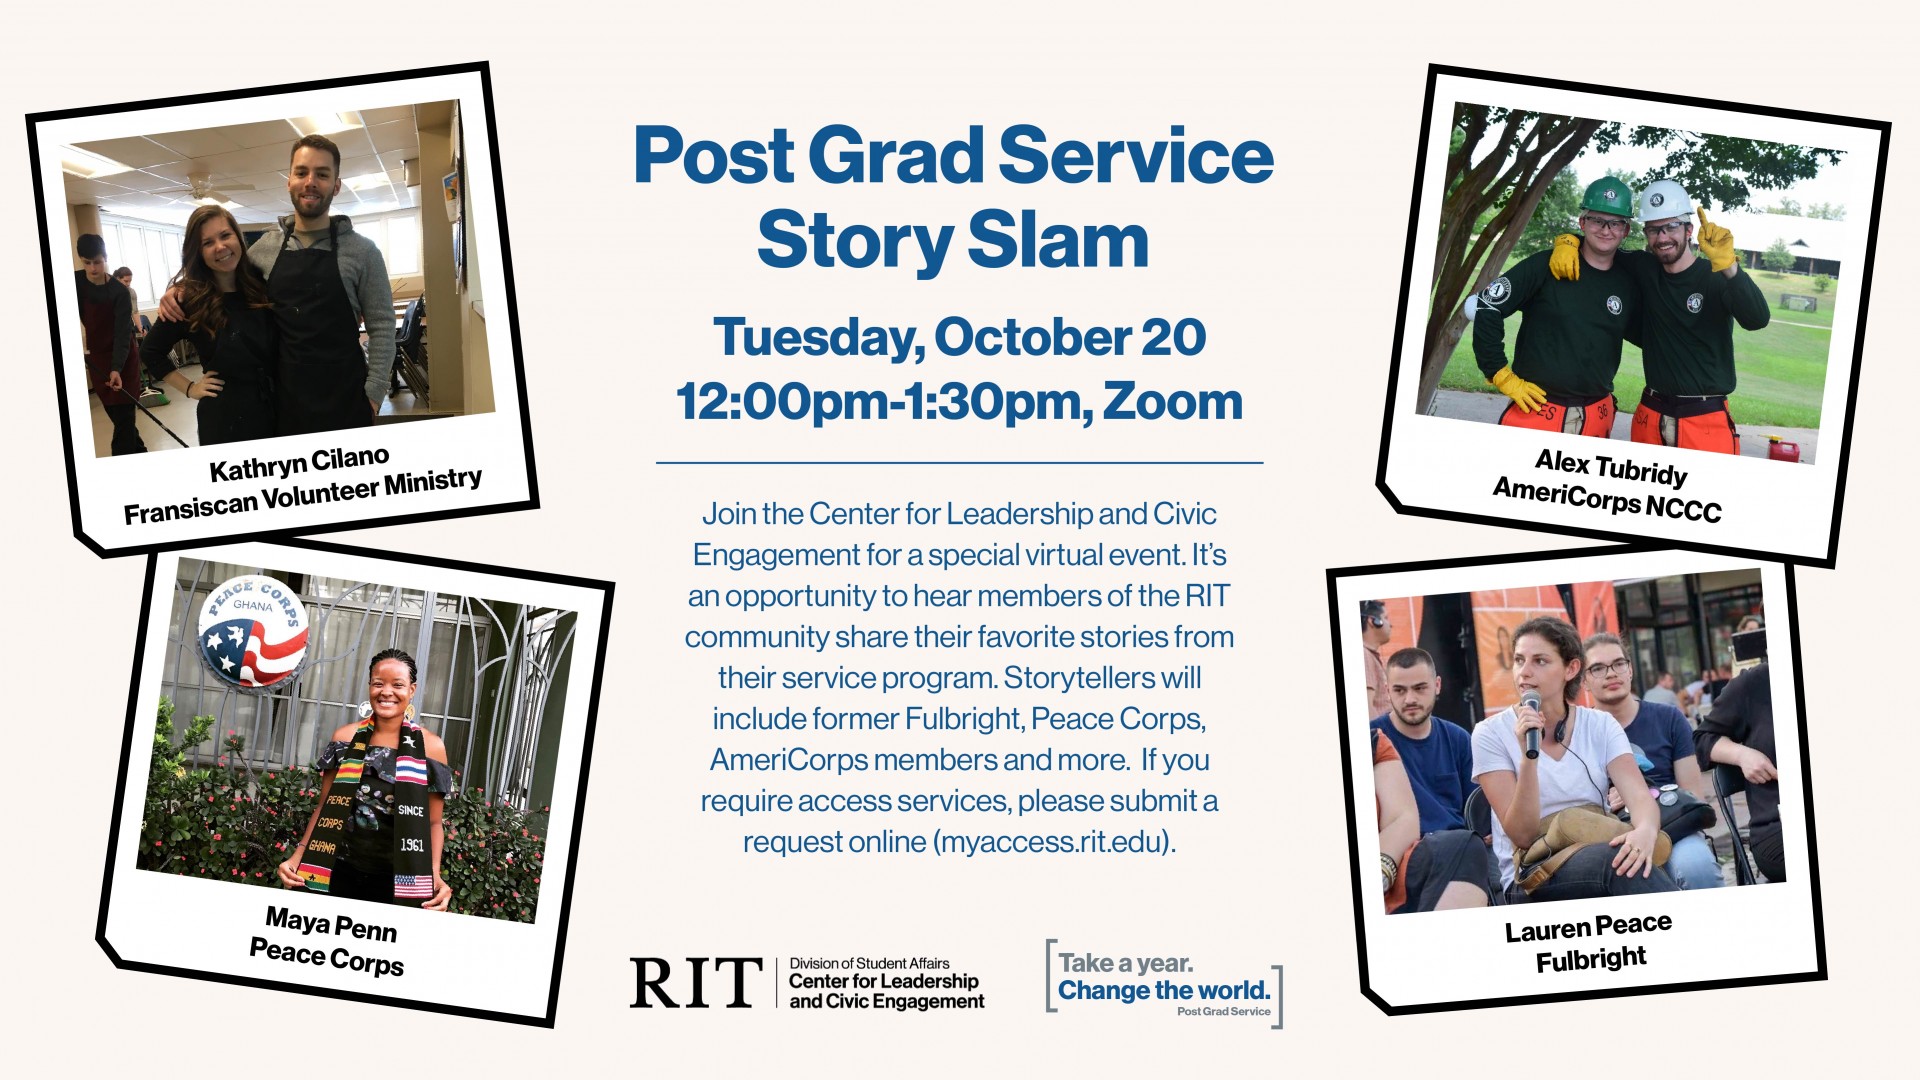 Join the Center for Leadership and Civic and Engagement for a special virtual event. It's an opportunity to hear members of the RIT community share their favorite stories from their service program. Storytellers will include former Fulbright, Peace Corps, AmeriCorps members and more.